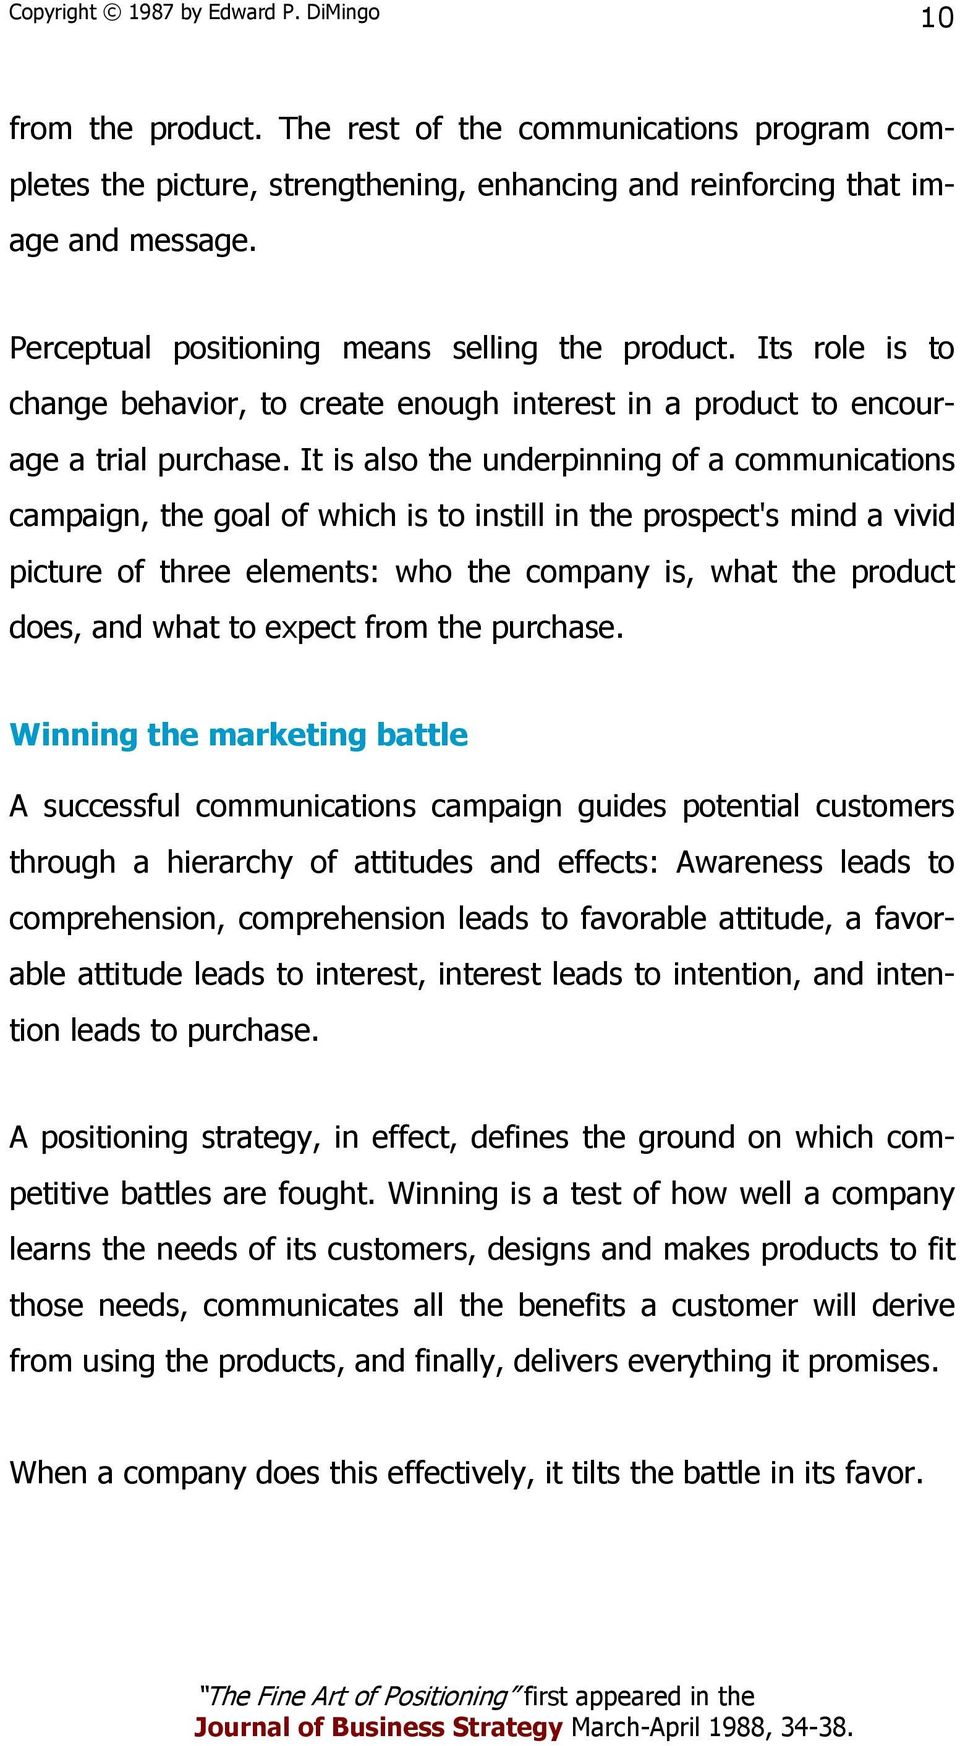 It is also the underpinning of a communications campaign, the goal of which is to instill in the prospect's mind a vivid picture of three elements: who the company is, what the product does, and what